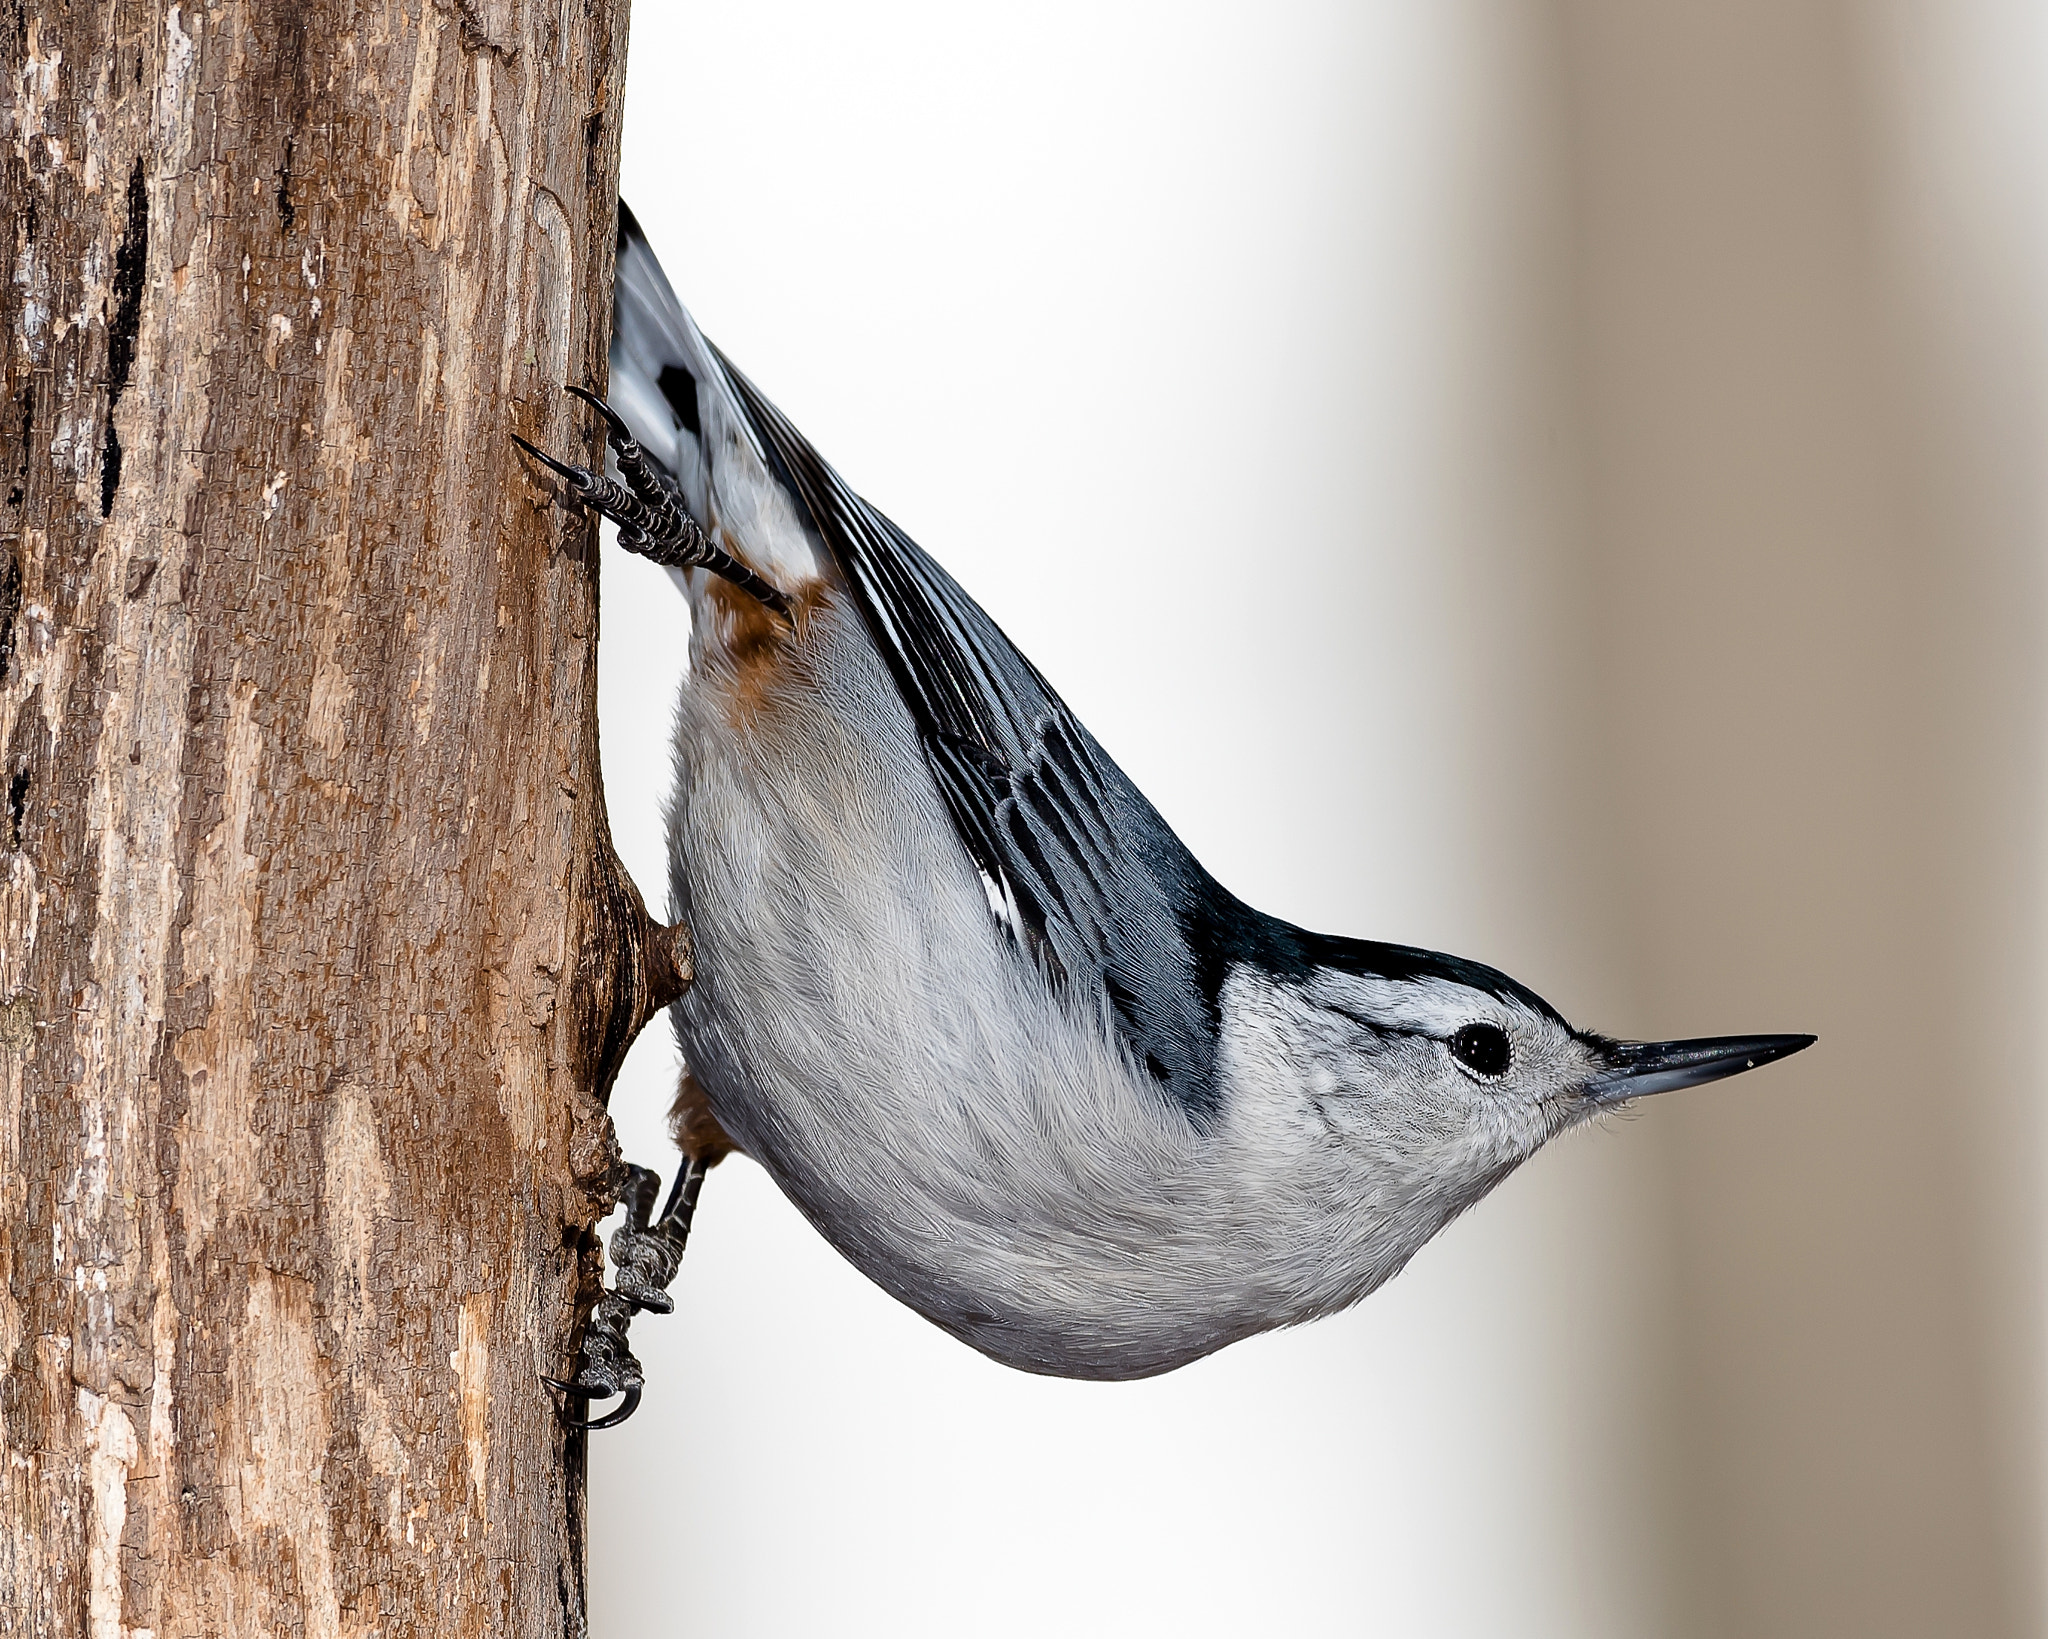 Nikon D810 sample photo. White_breasted nuthatch photography